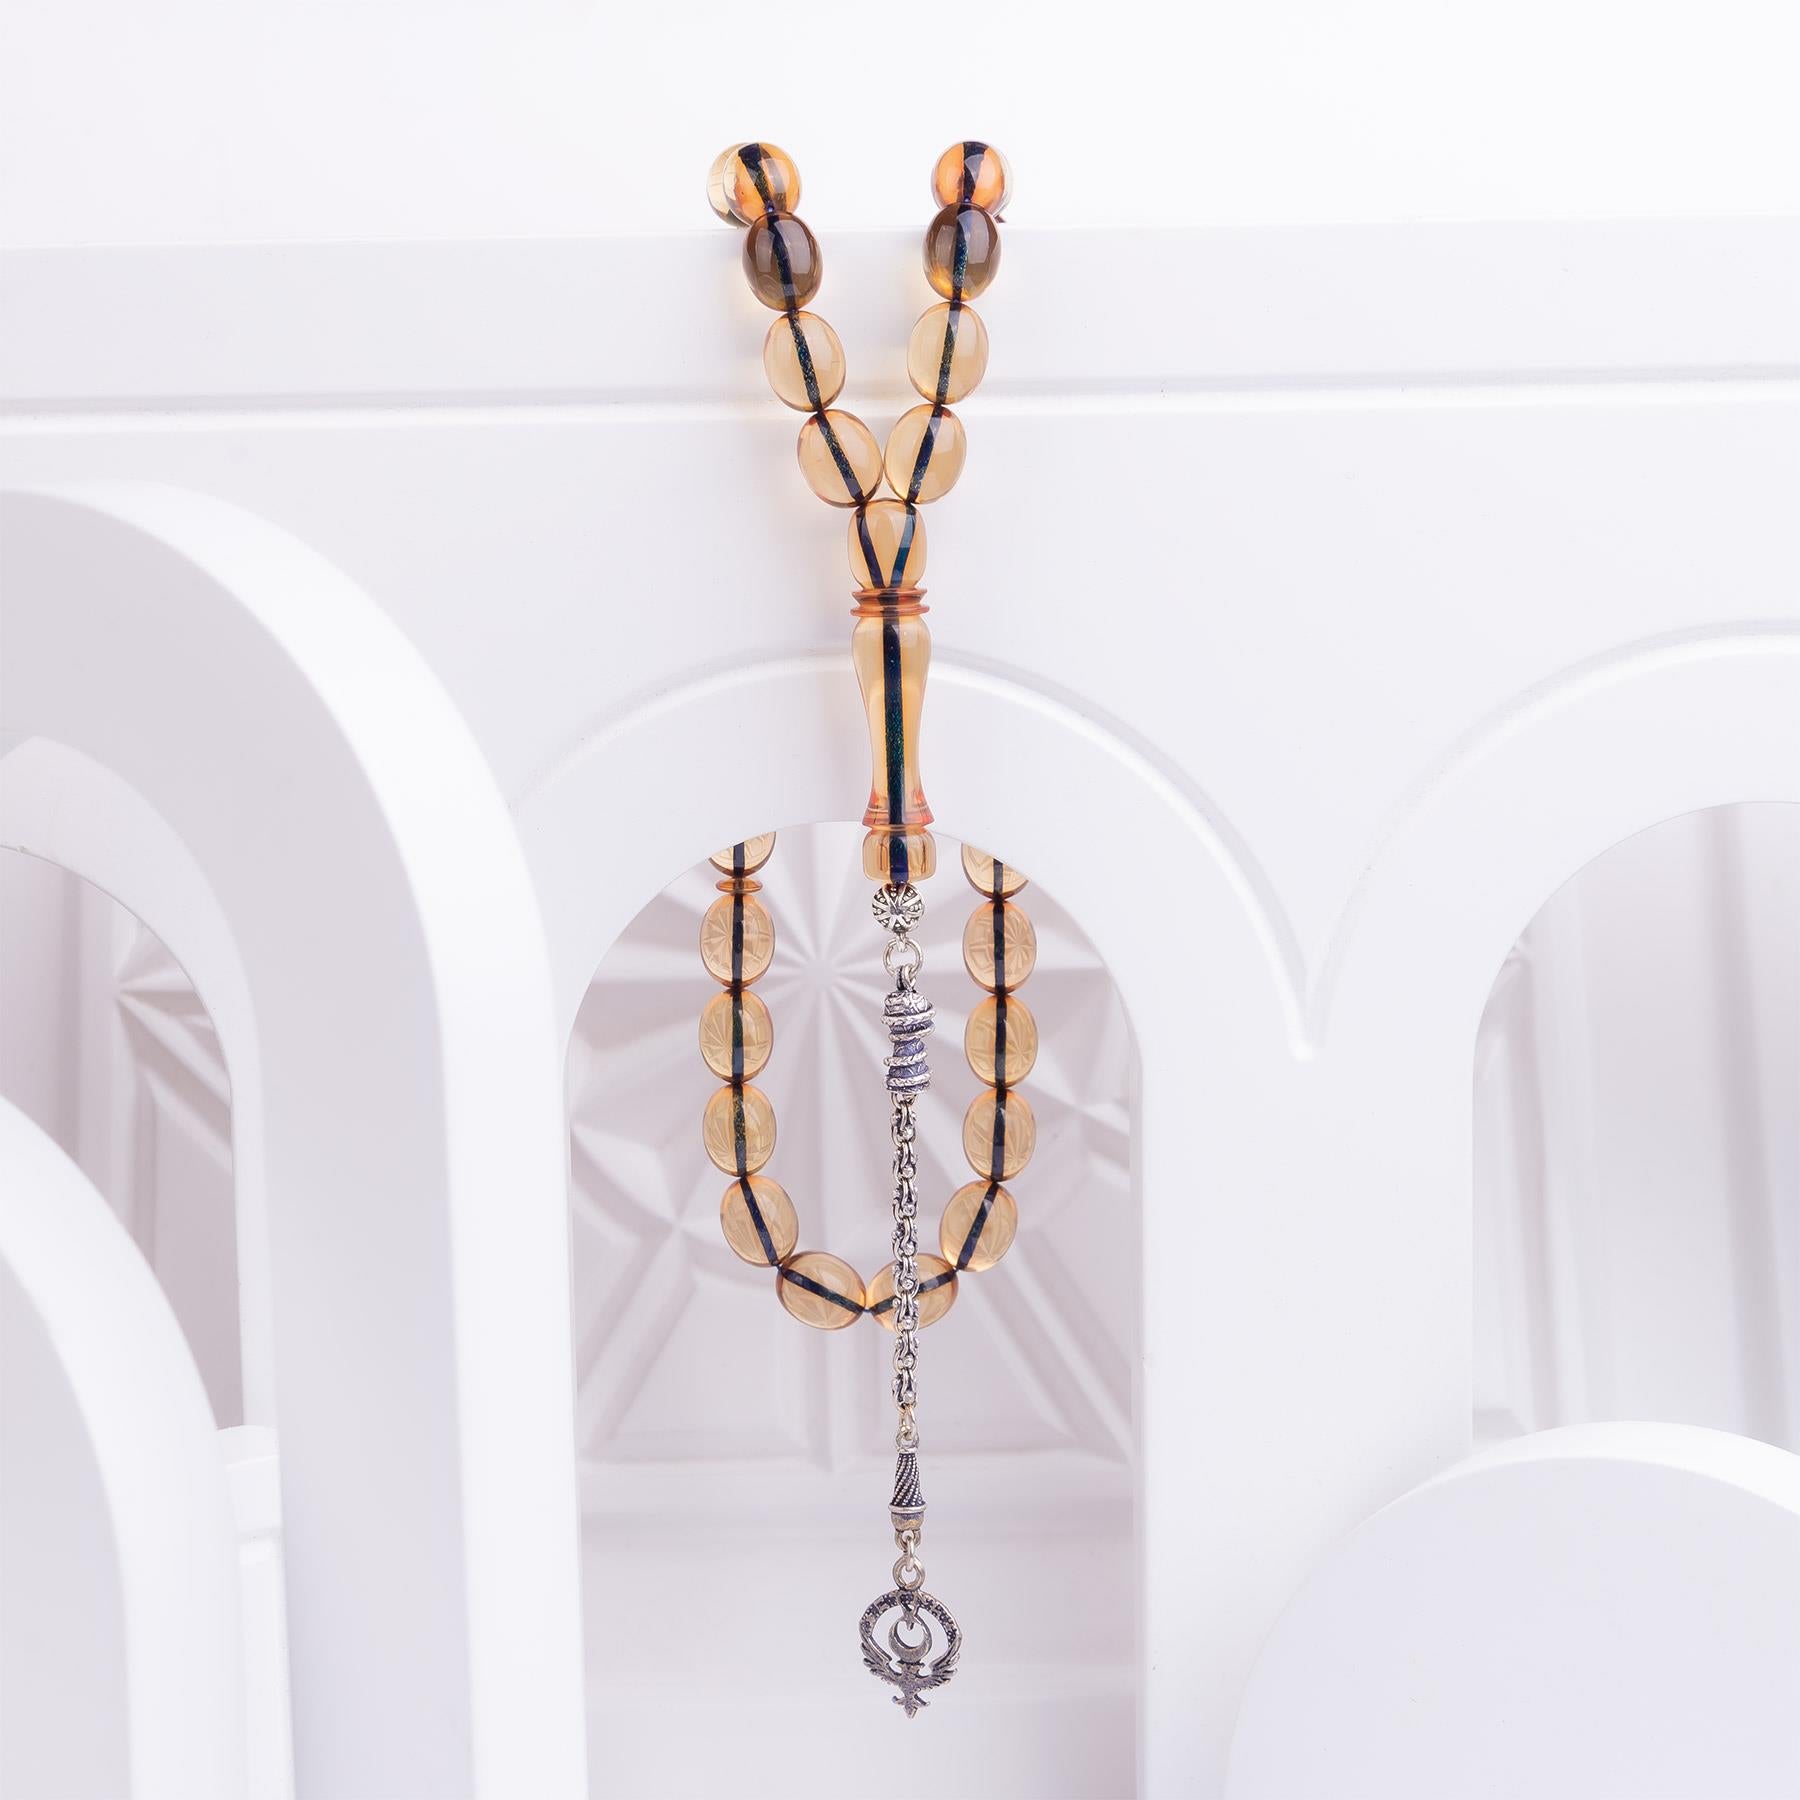 Ve Tesbih Solid Cut Fire Amber Rosary with Silver Tassels 2